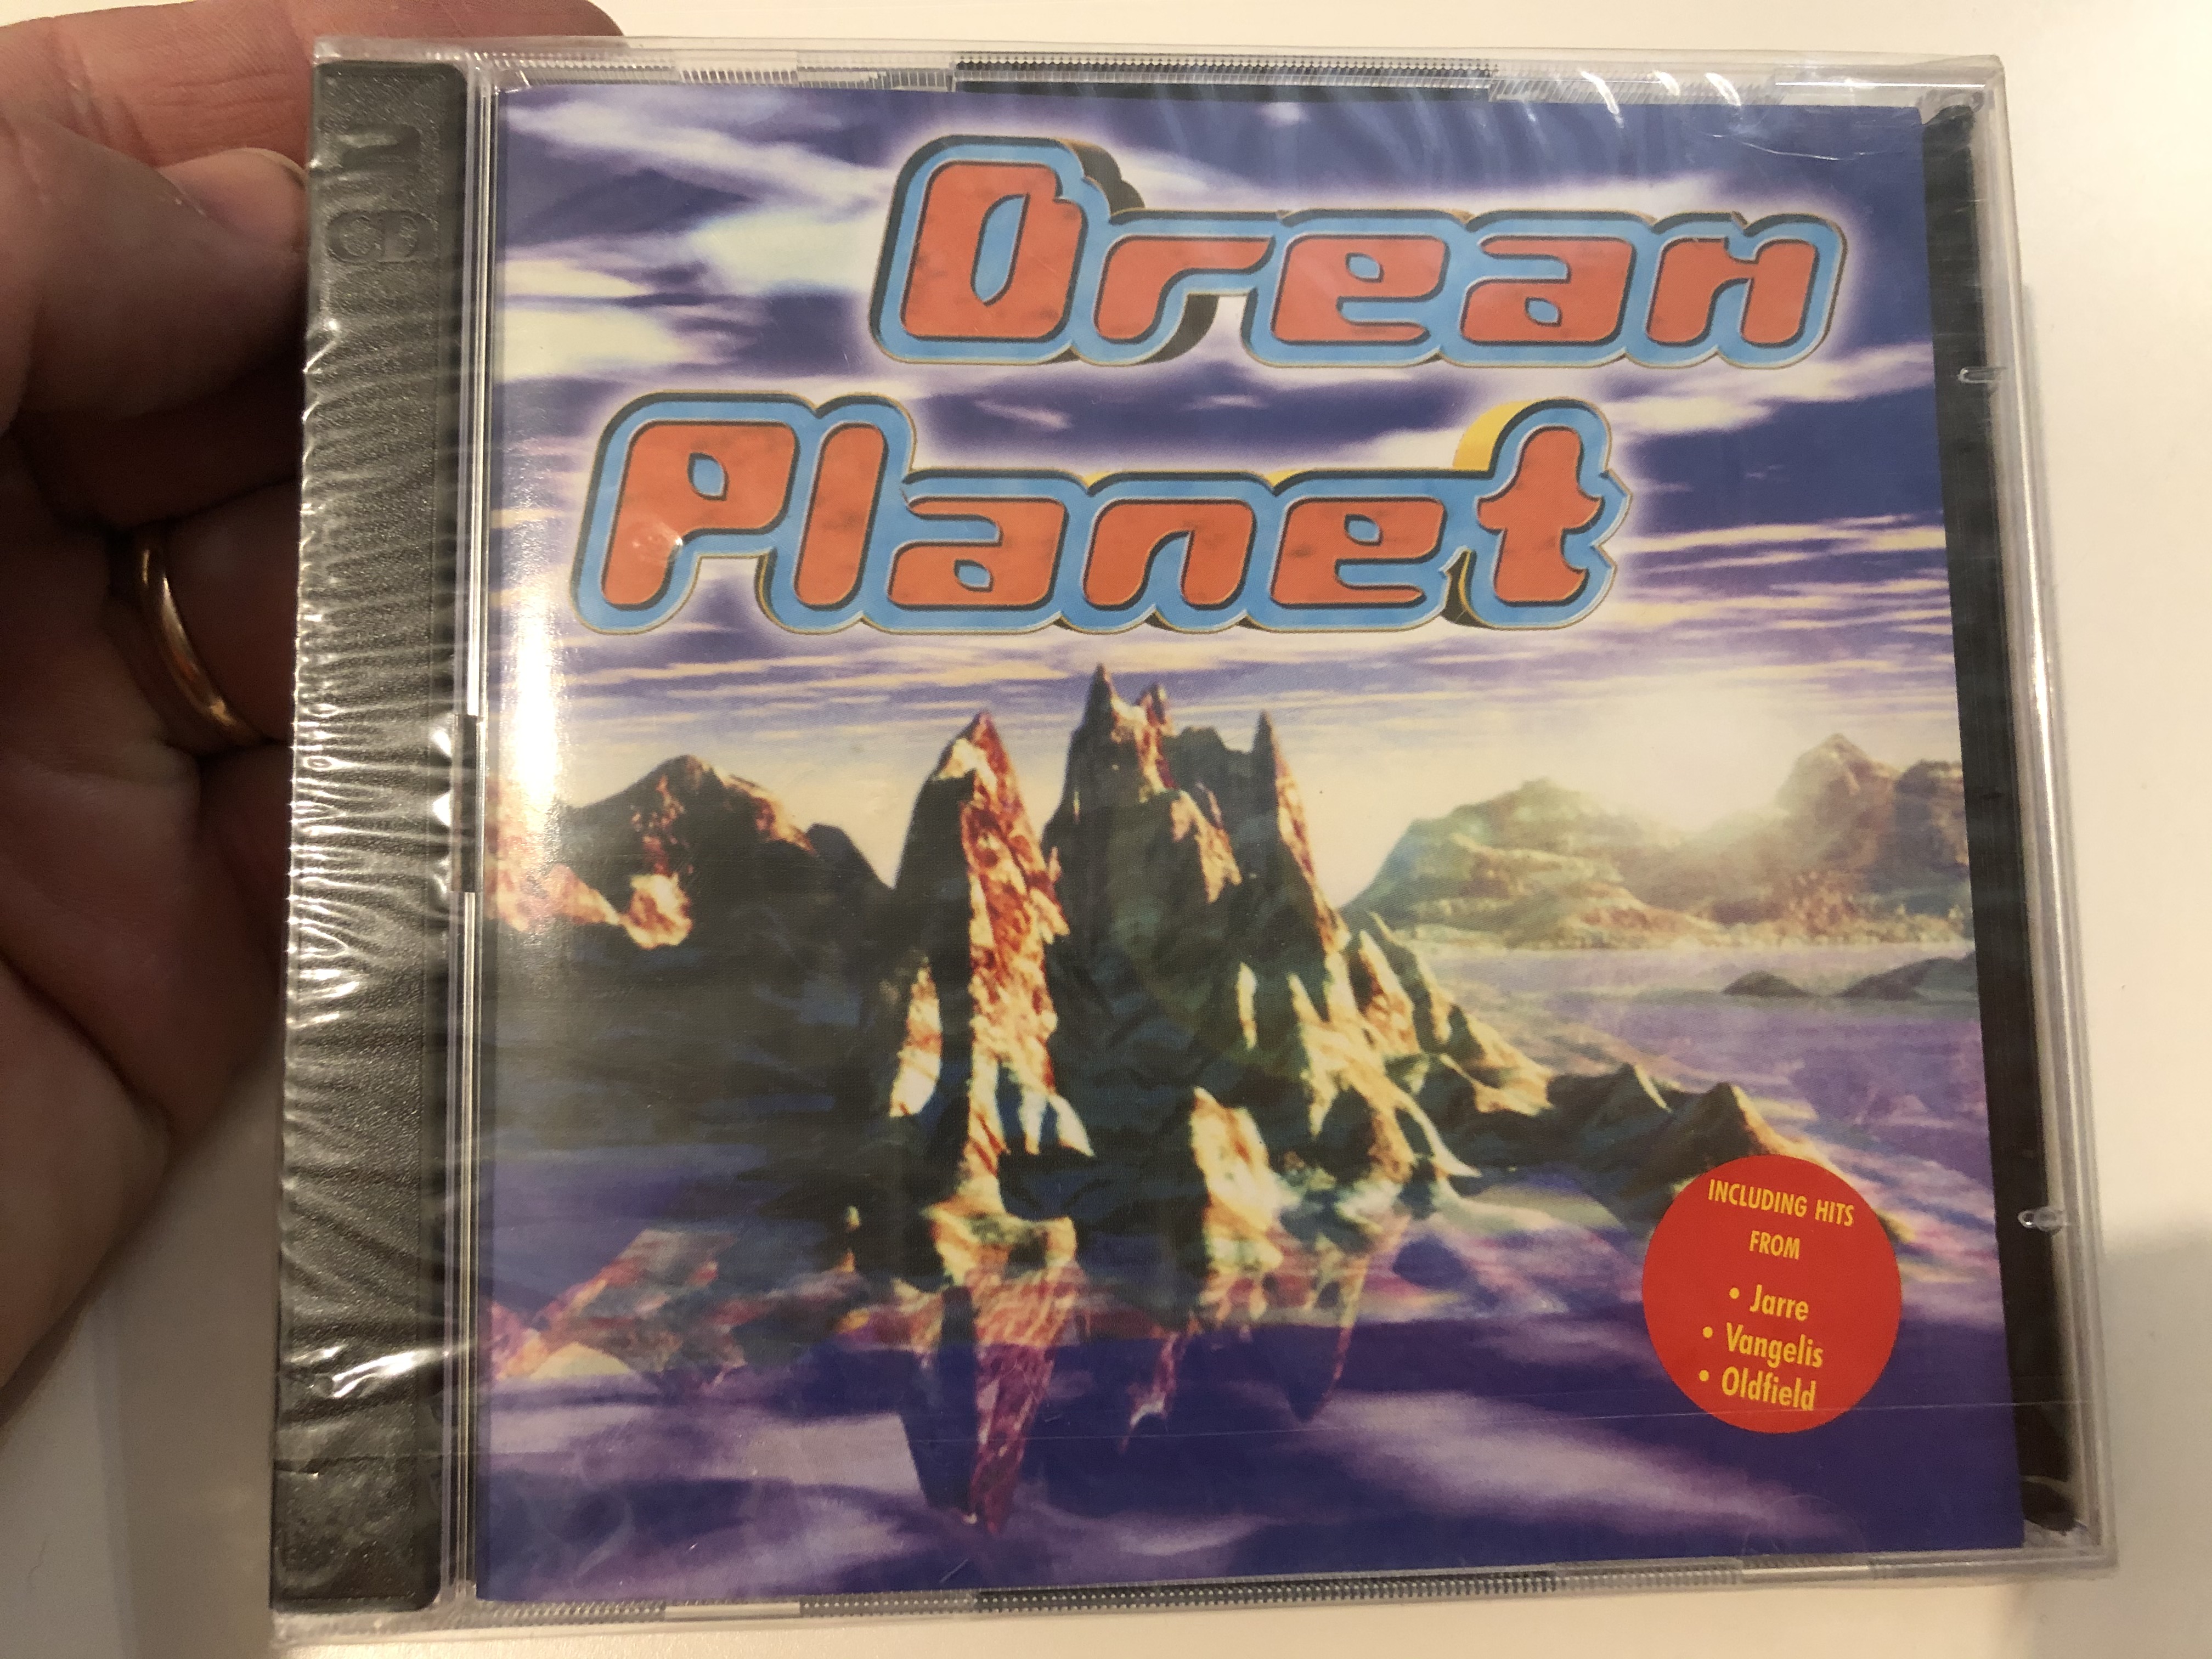 dream-planet-including-hits-from-jarre-vangelis-oldfield-record-express-2x-audio-cd-rec-942-1-.jpg